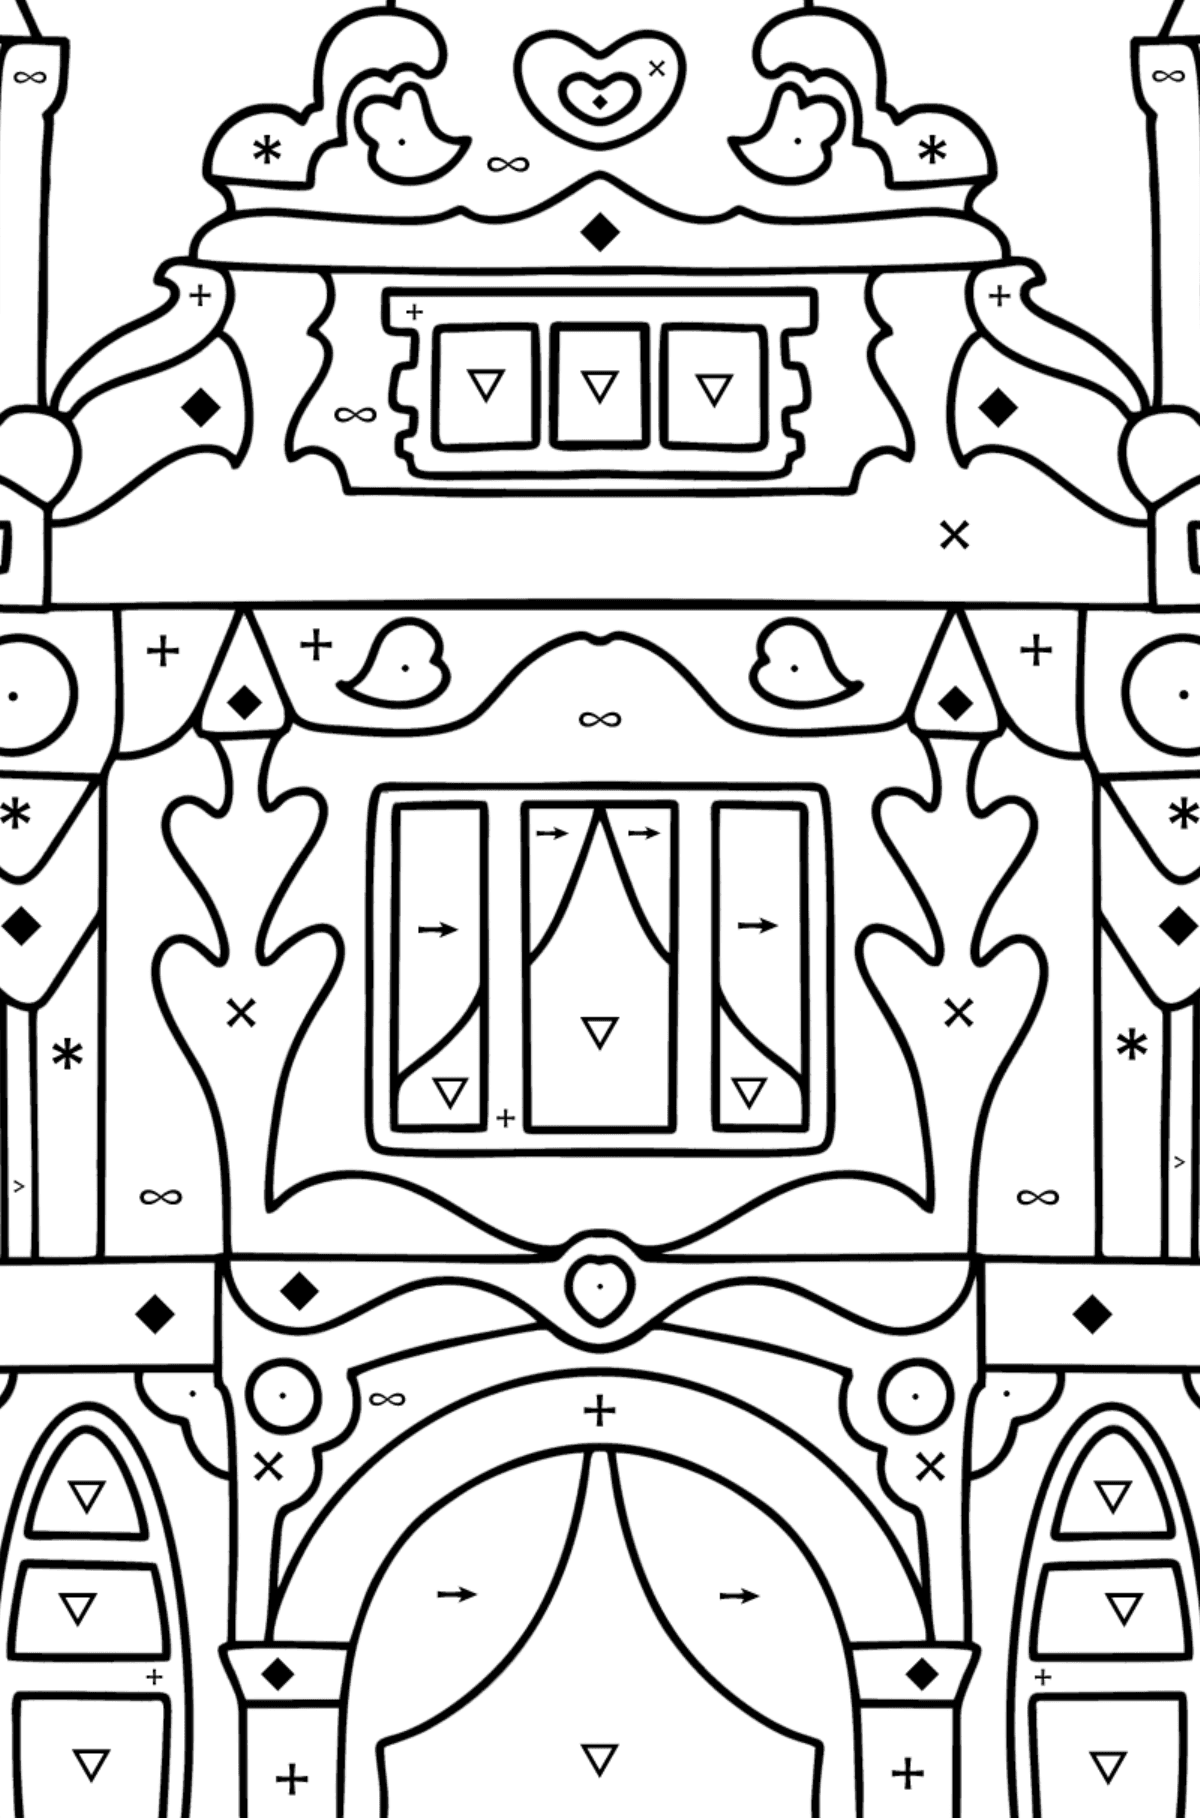 Two Storey House coloring page - Coloring by Symbols for Kids